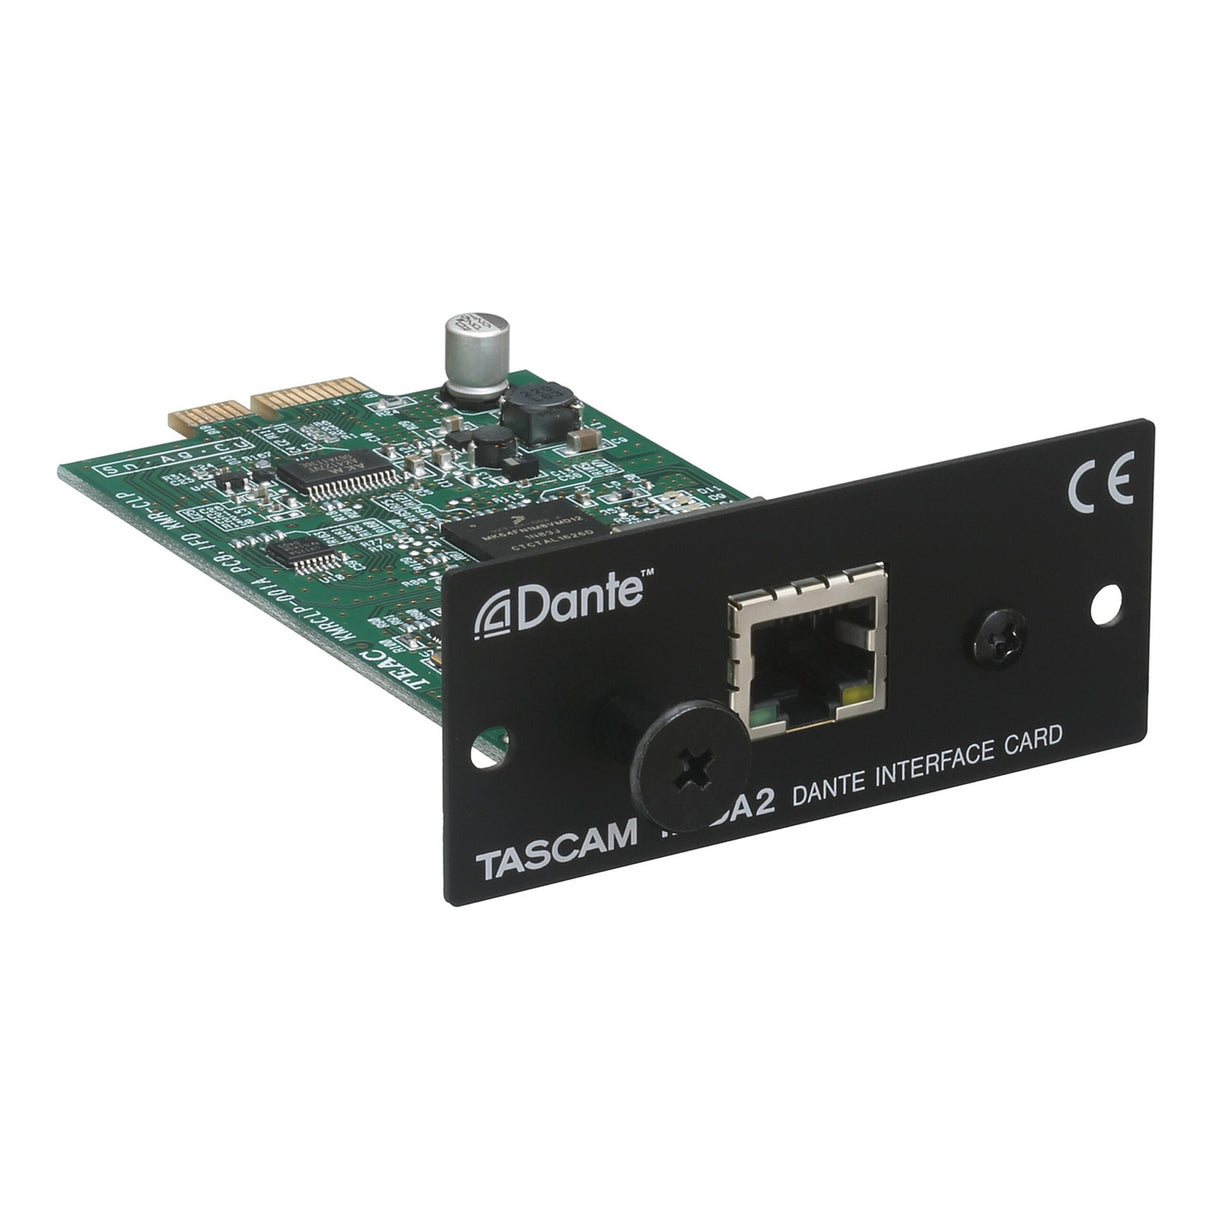 Tascam IF-DA2 Dante Interface Card for SS-R250N/SS-CDR250N, 2 In/2 Out